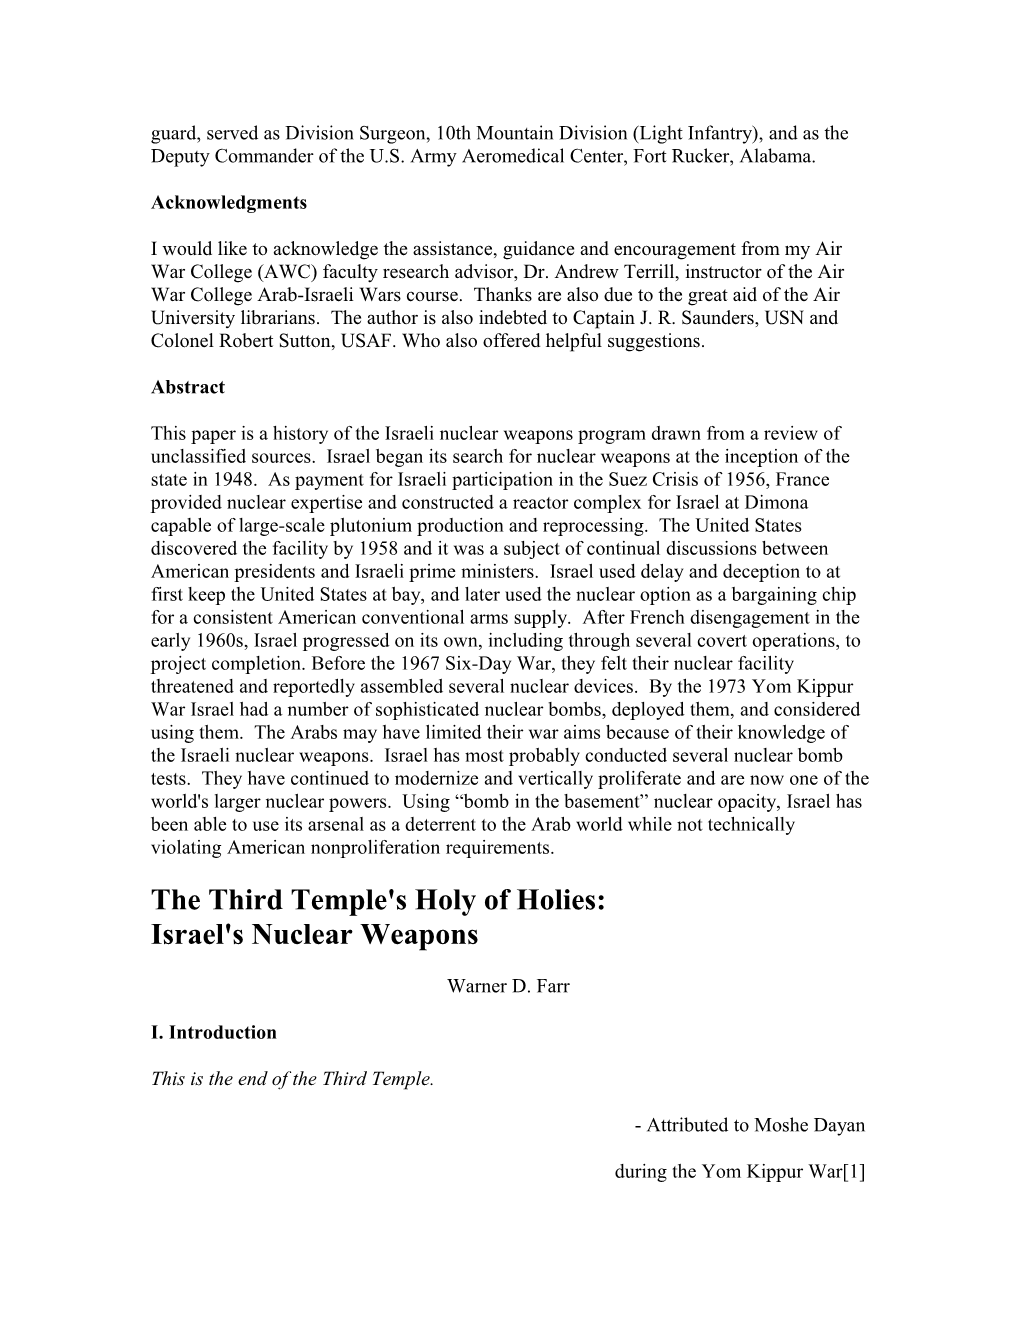 The Thirdtemple's Holy of Holies: Israel's Nuclear Weapons